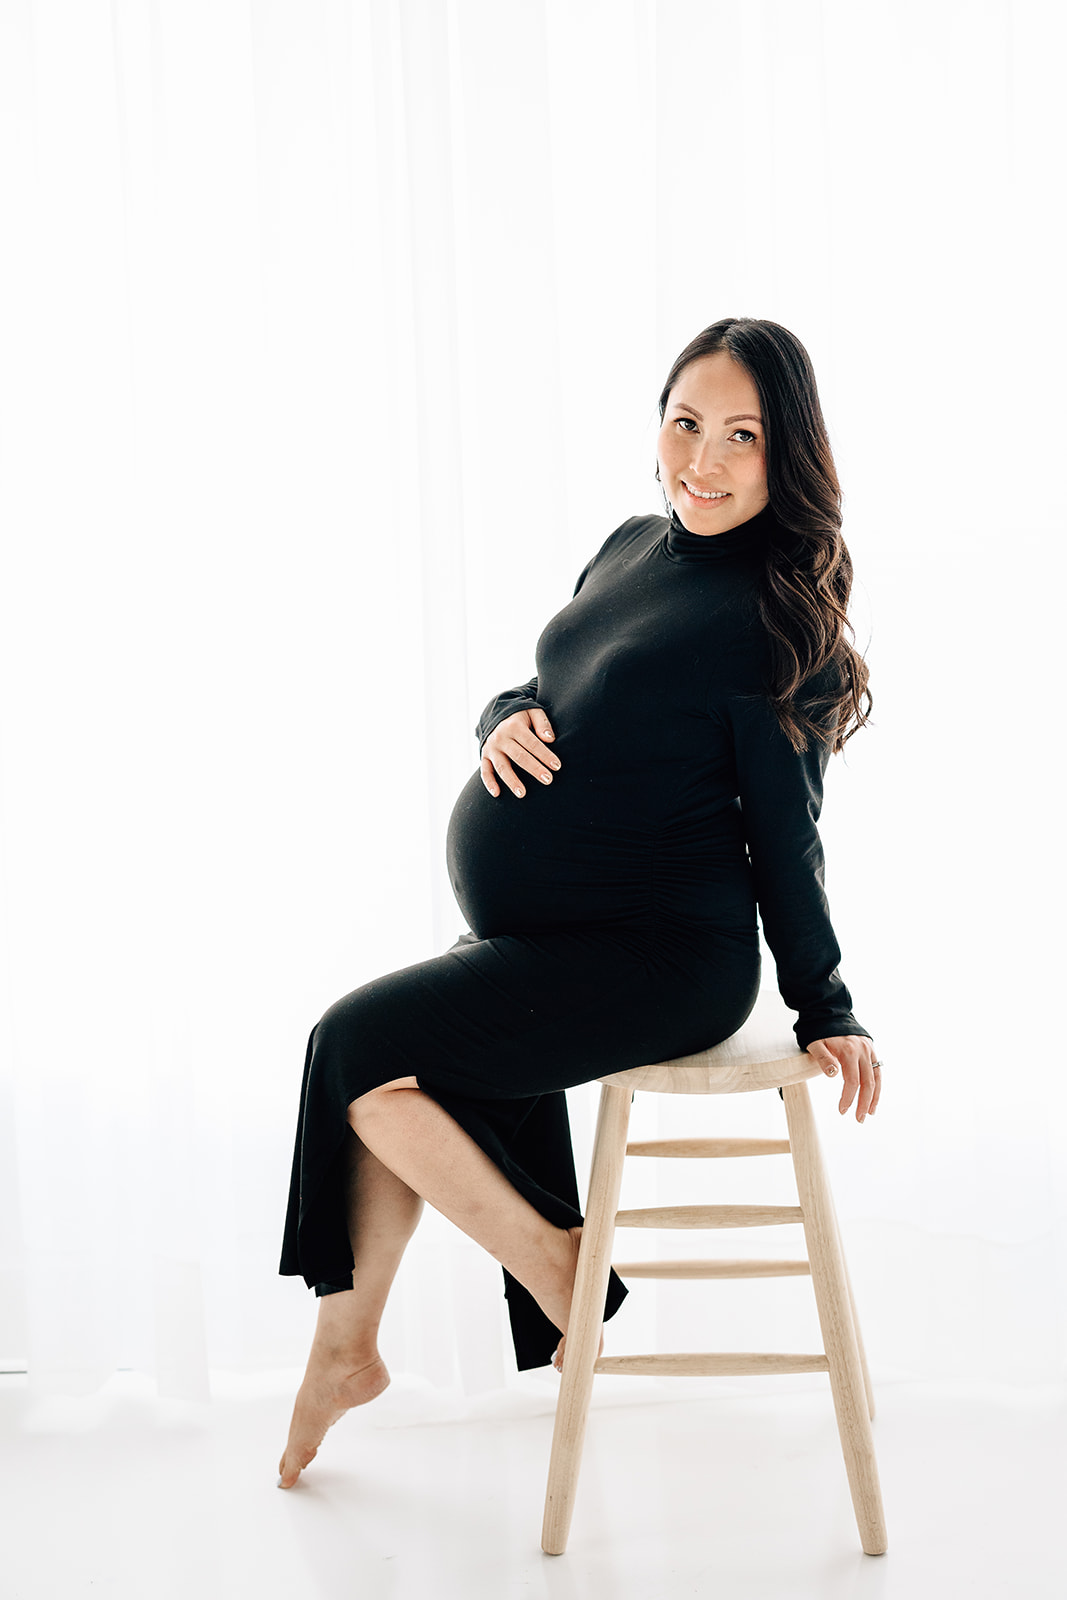 A mom to be sits on a wooden stool in a studio holding her bump and looking over her shoulder